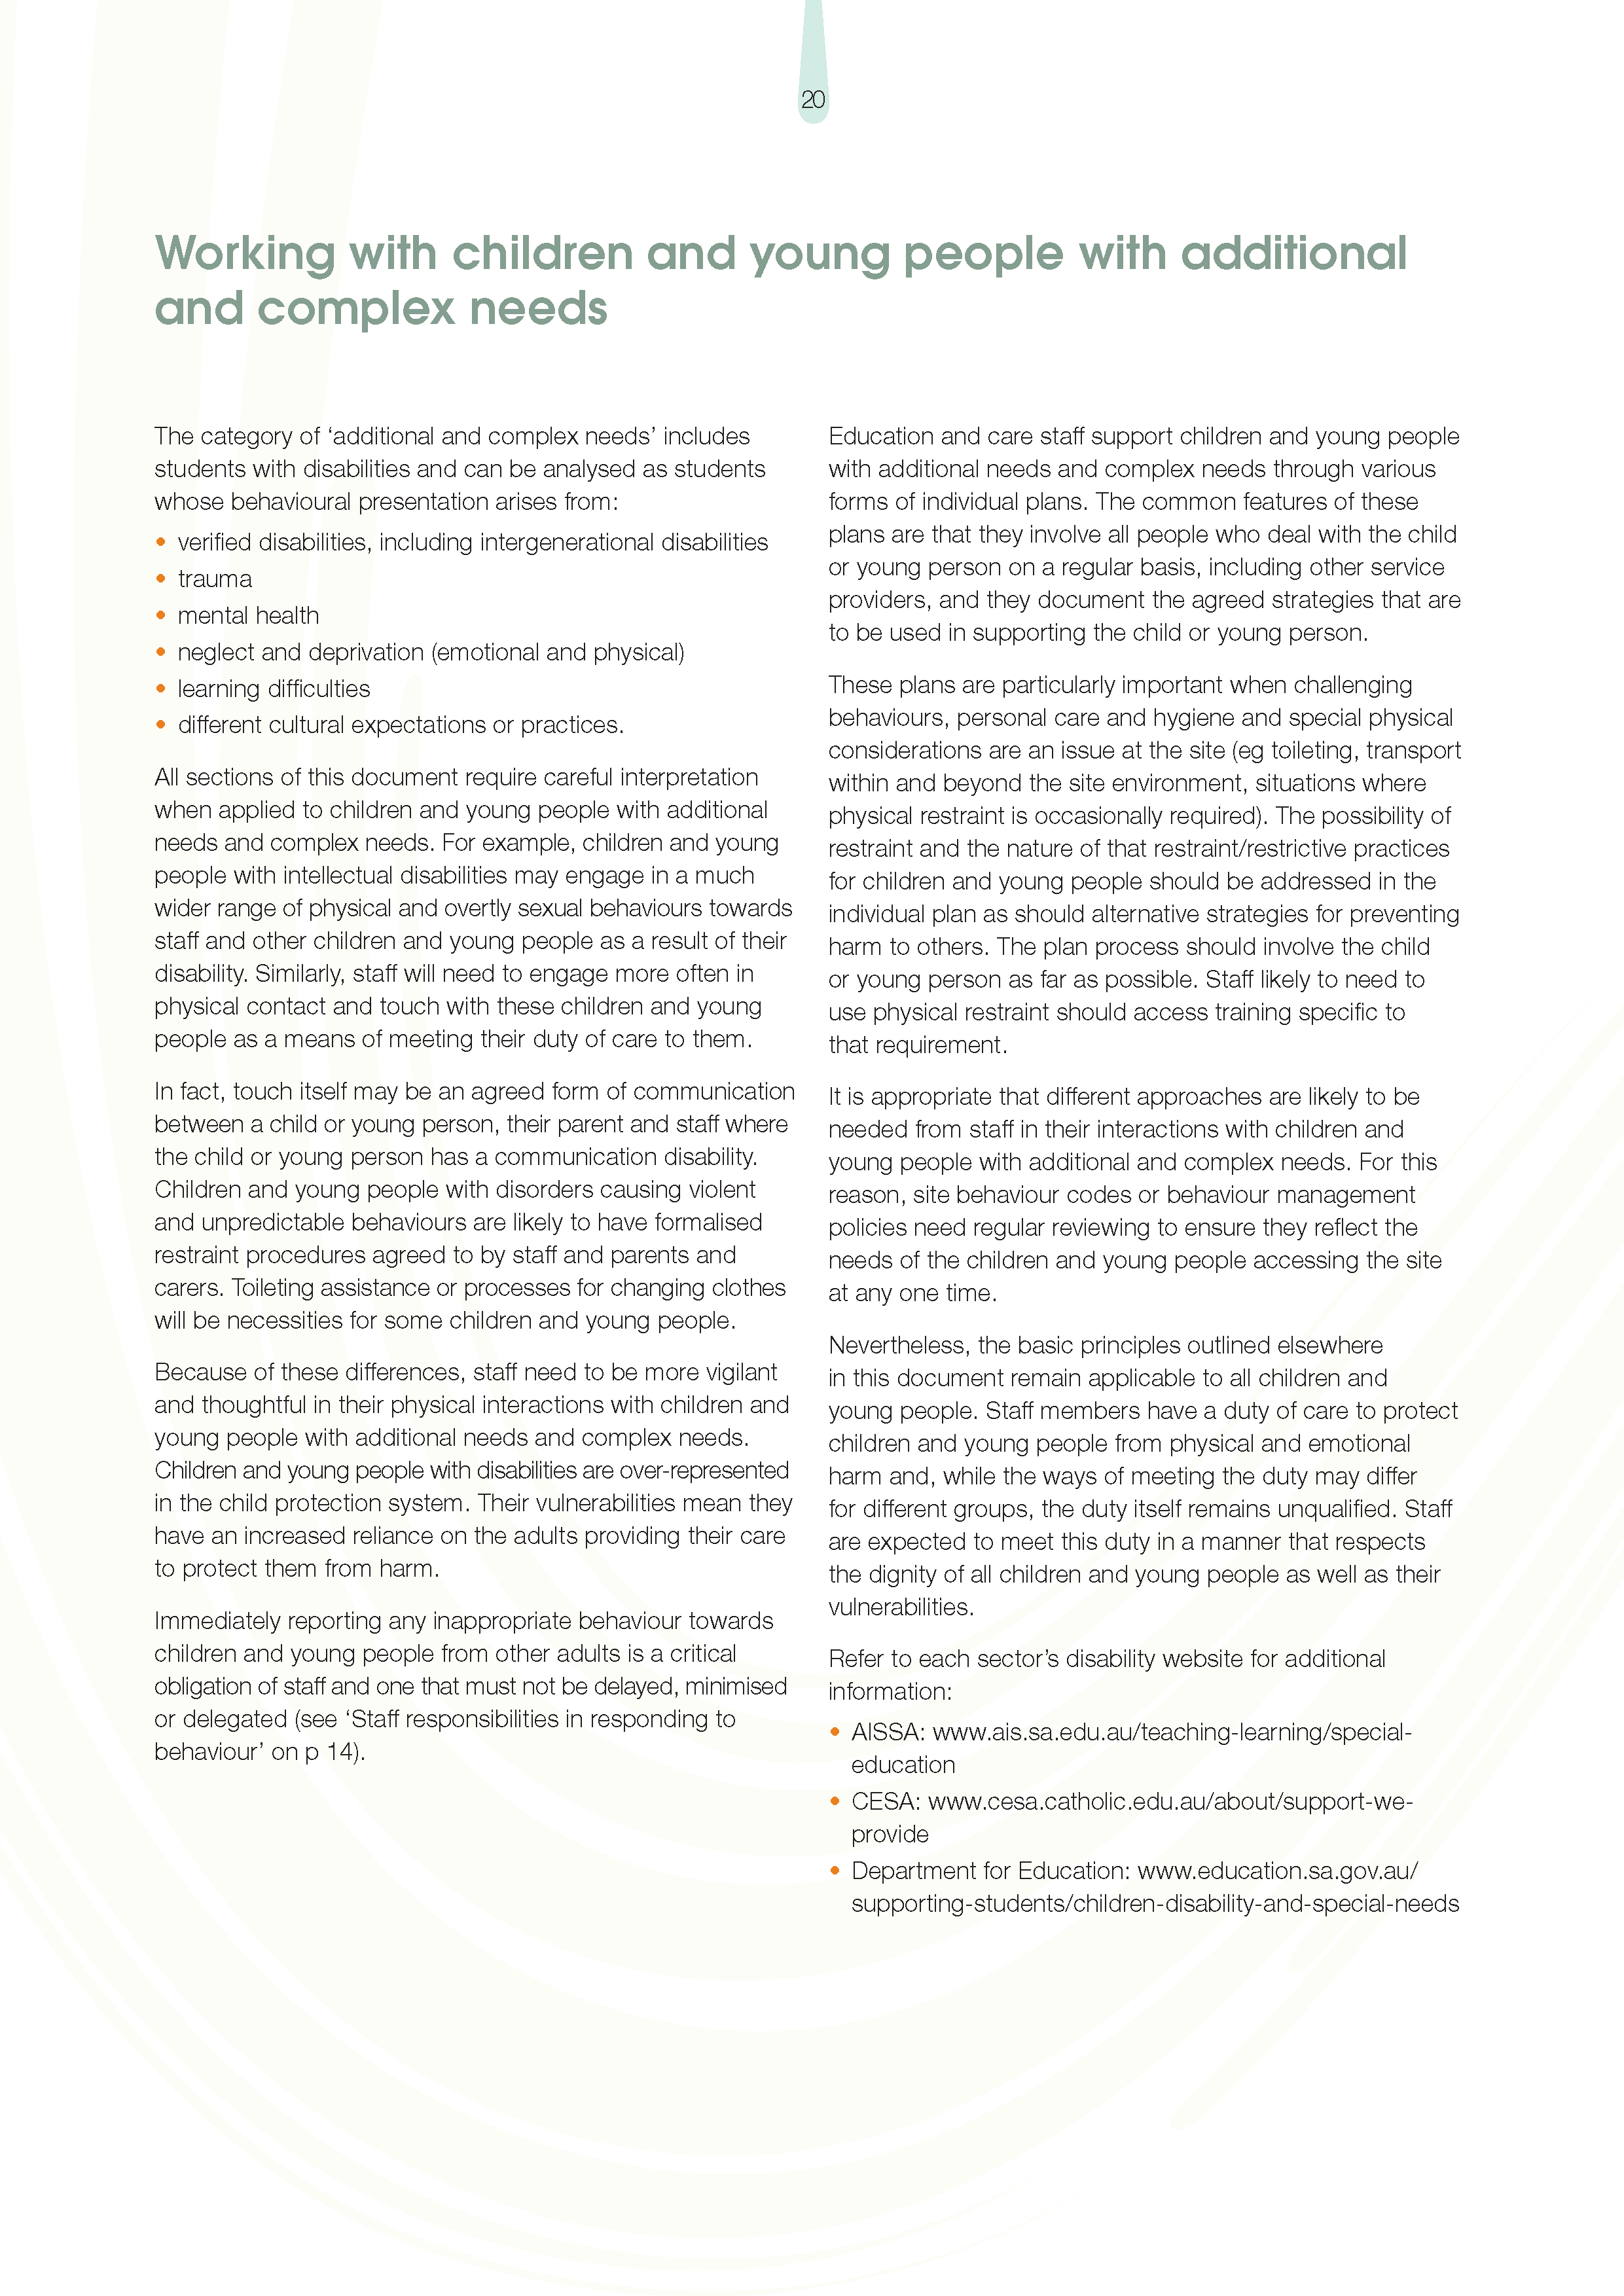 protective_practices_for_staff_in_their_interactions_with_children_and_young_people 2019_Page_23.png